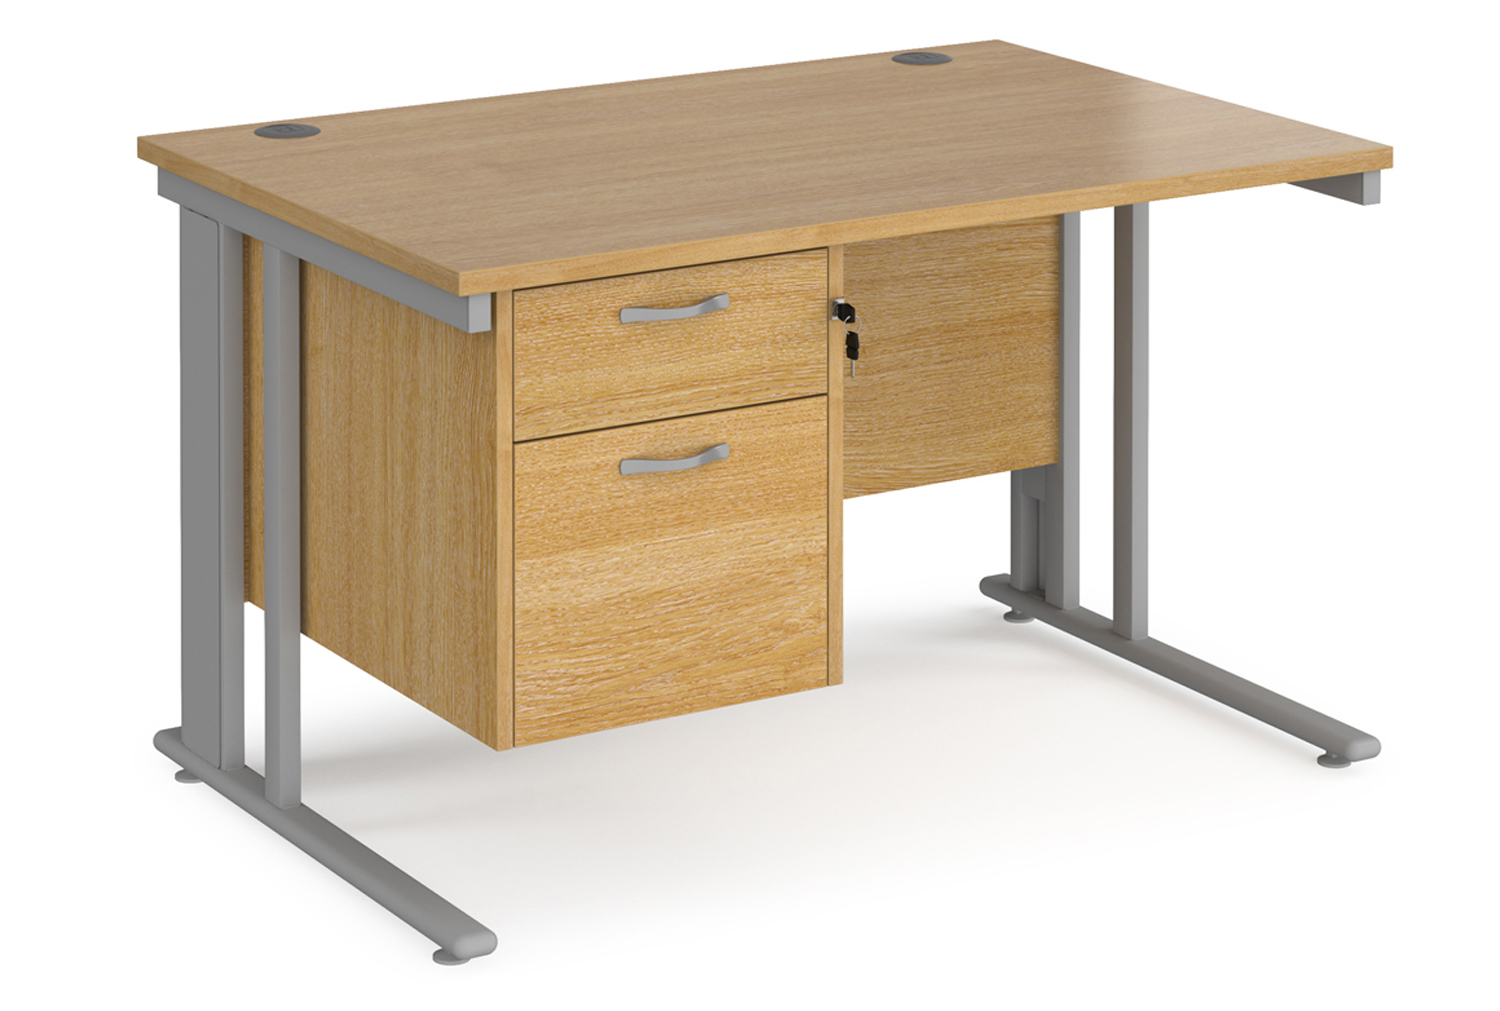 Value Line Deluxe Cable Managed Rectangular Office Desk 2 Drawers (Silver Legs), 120wx80dx73h (cm), Oak